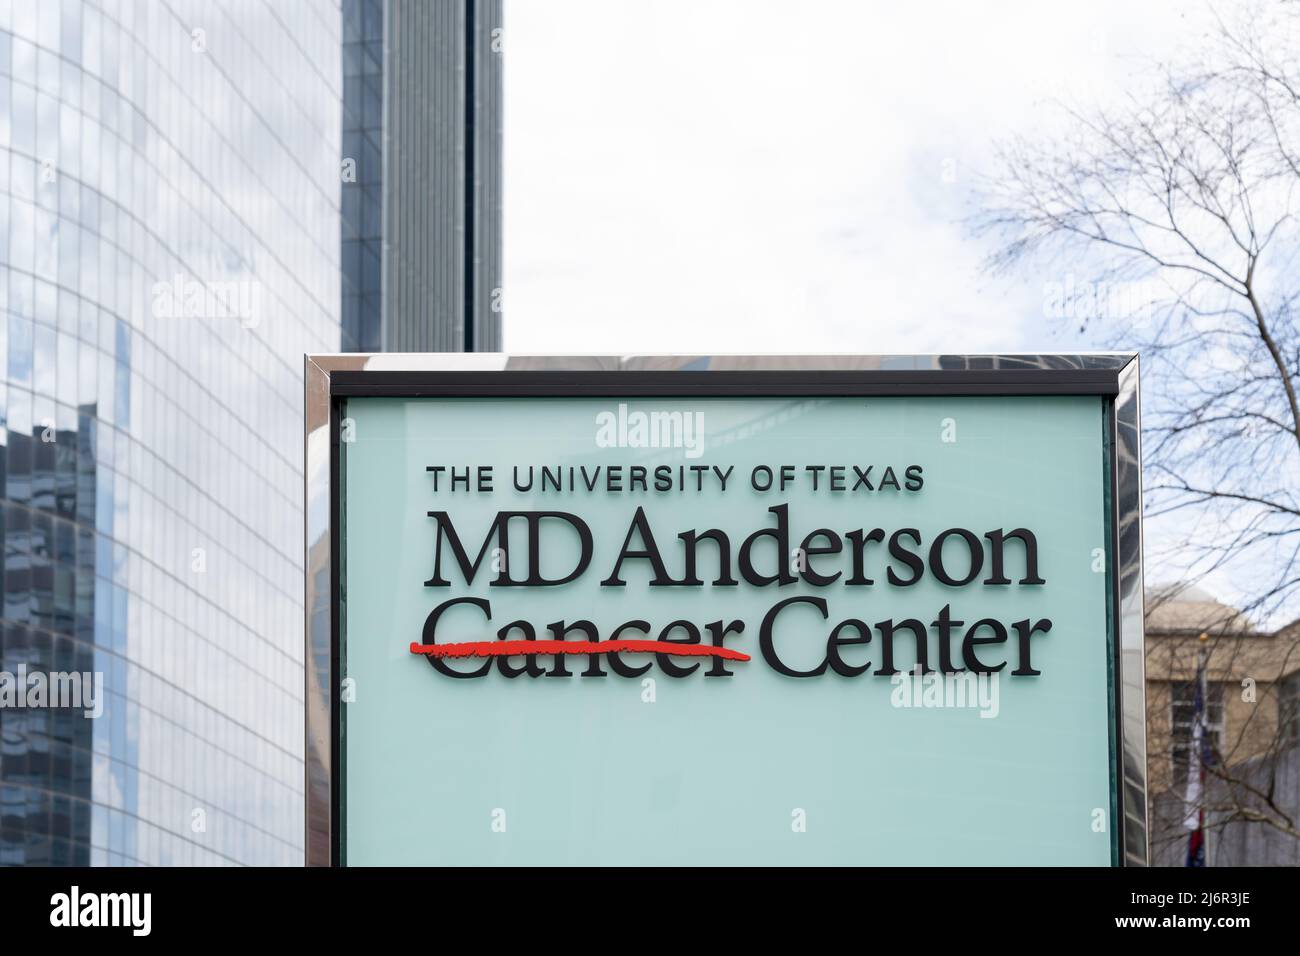 Houston, Texas, USA - March 9, 2022: The sign for University of Texas MD Anderson Cancer Center in Houston, Texas, USA Stock Photo